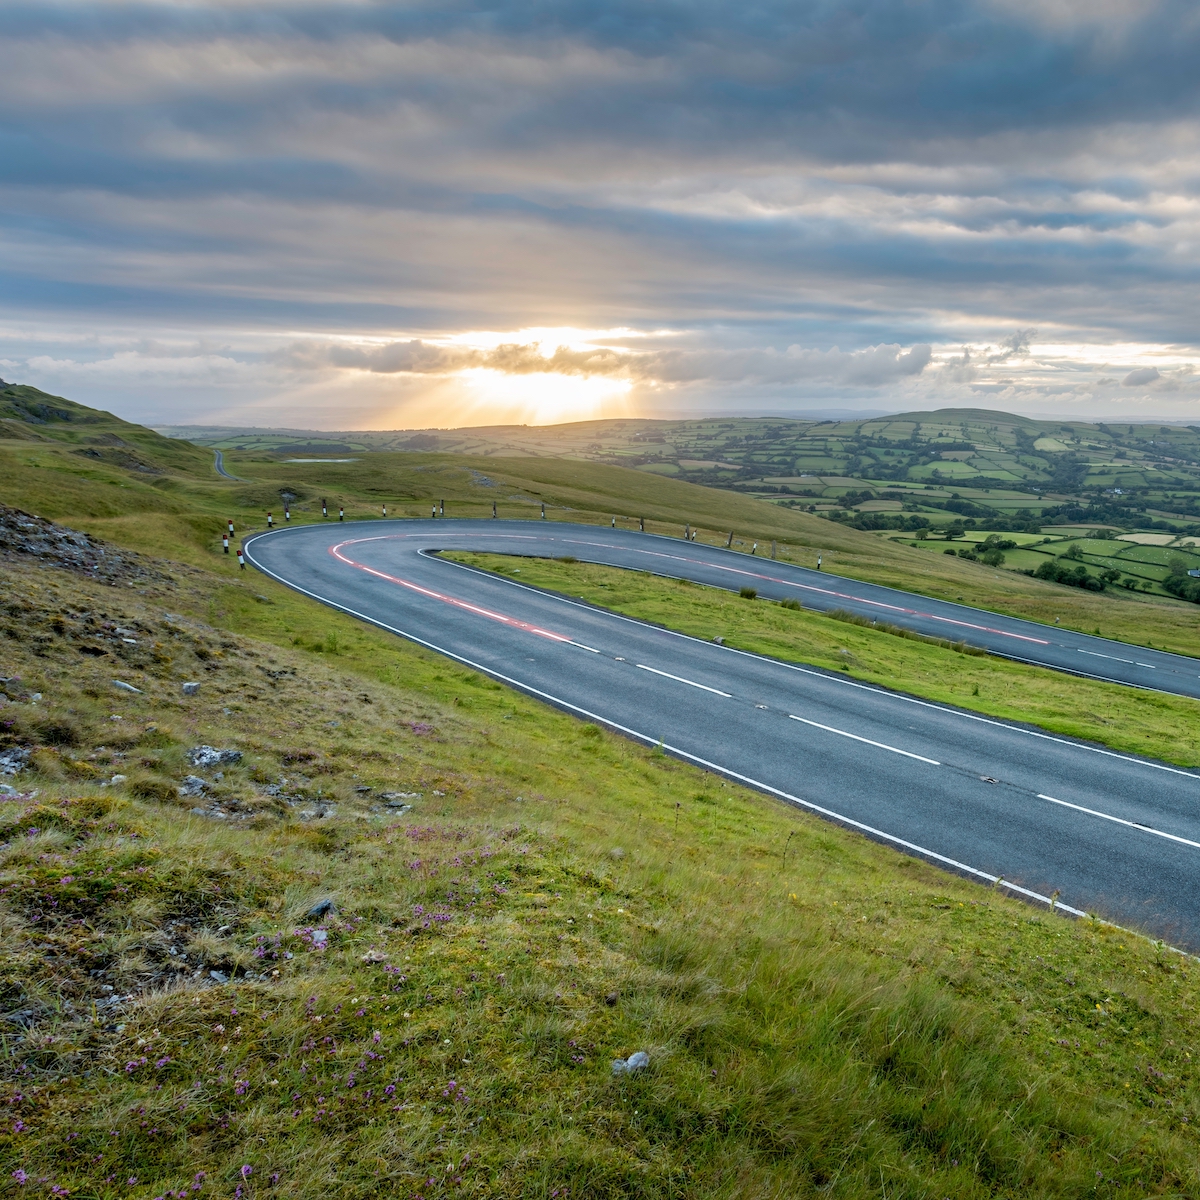 The Black Mountain Pass in South Wales